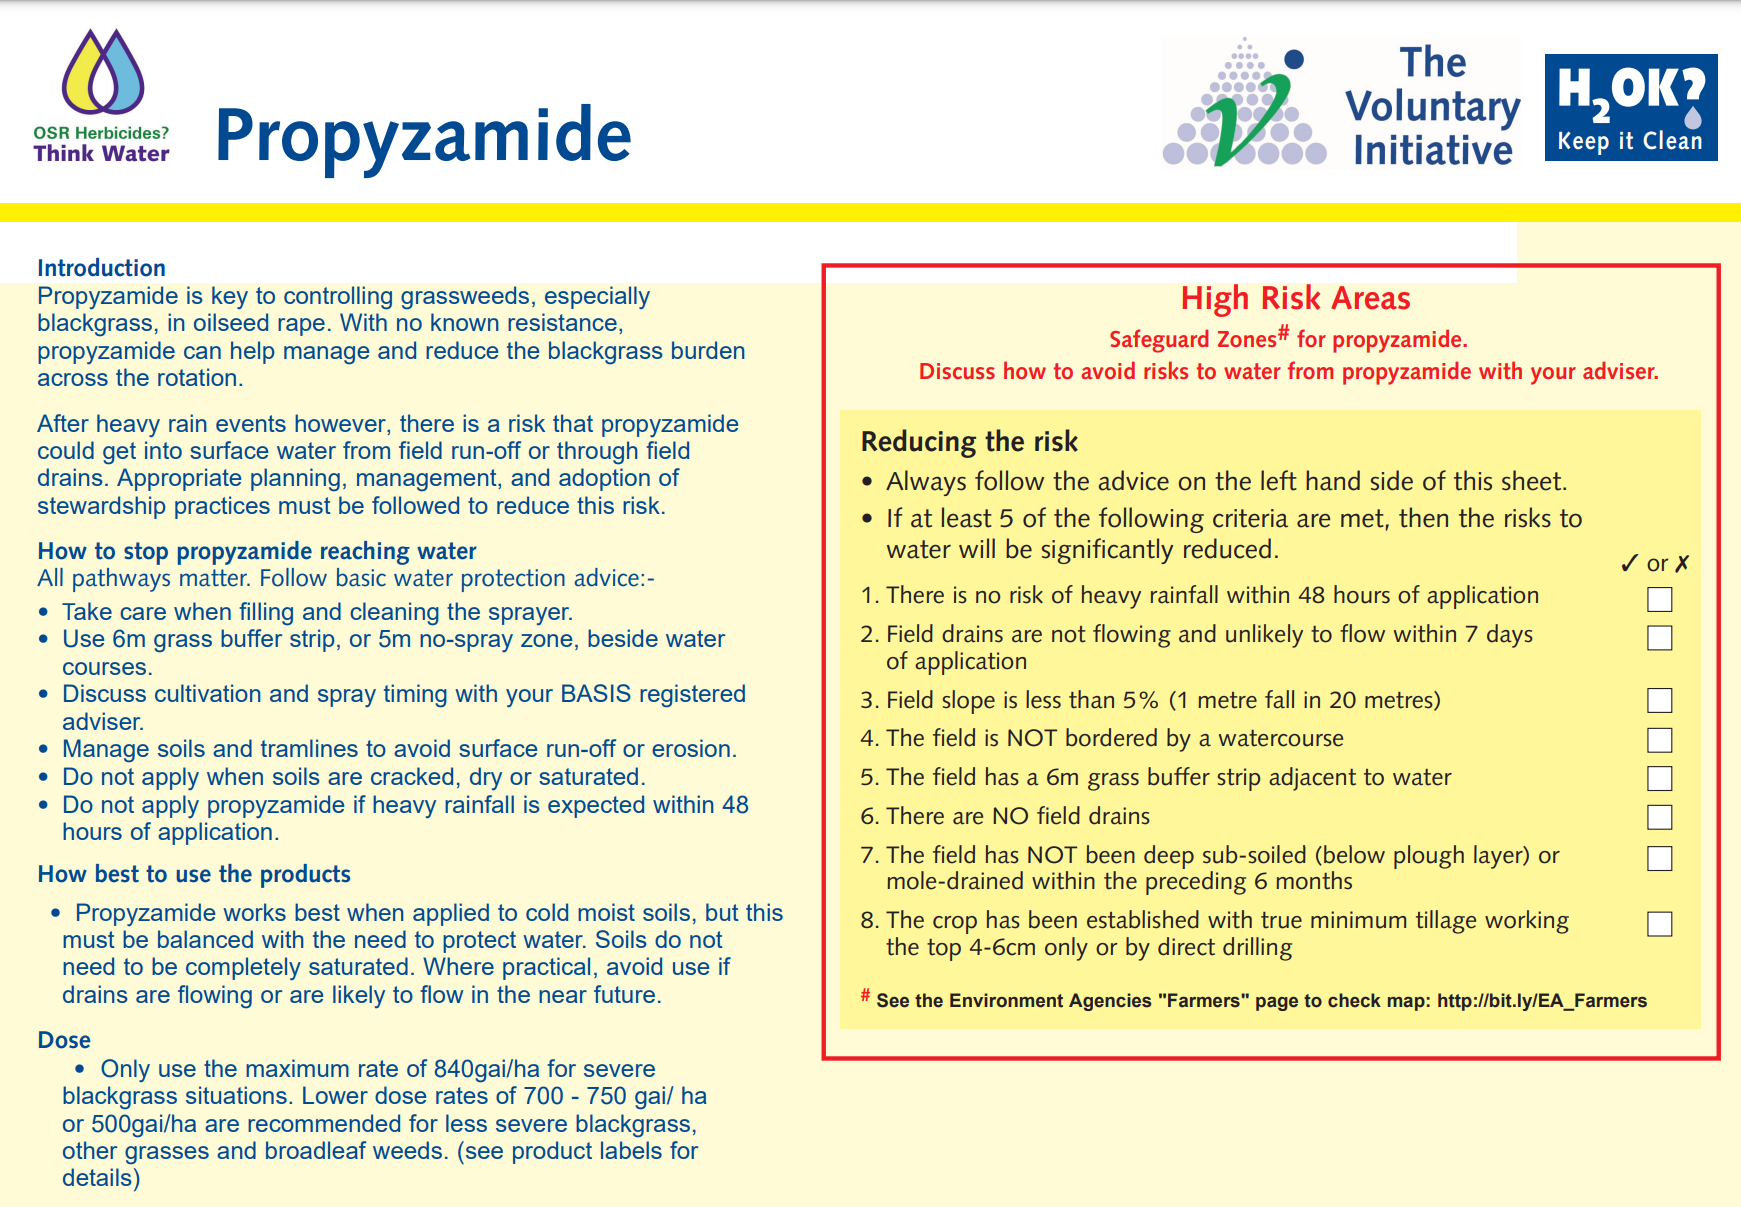 Propyzamide "use by" date fast approaching